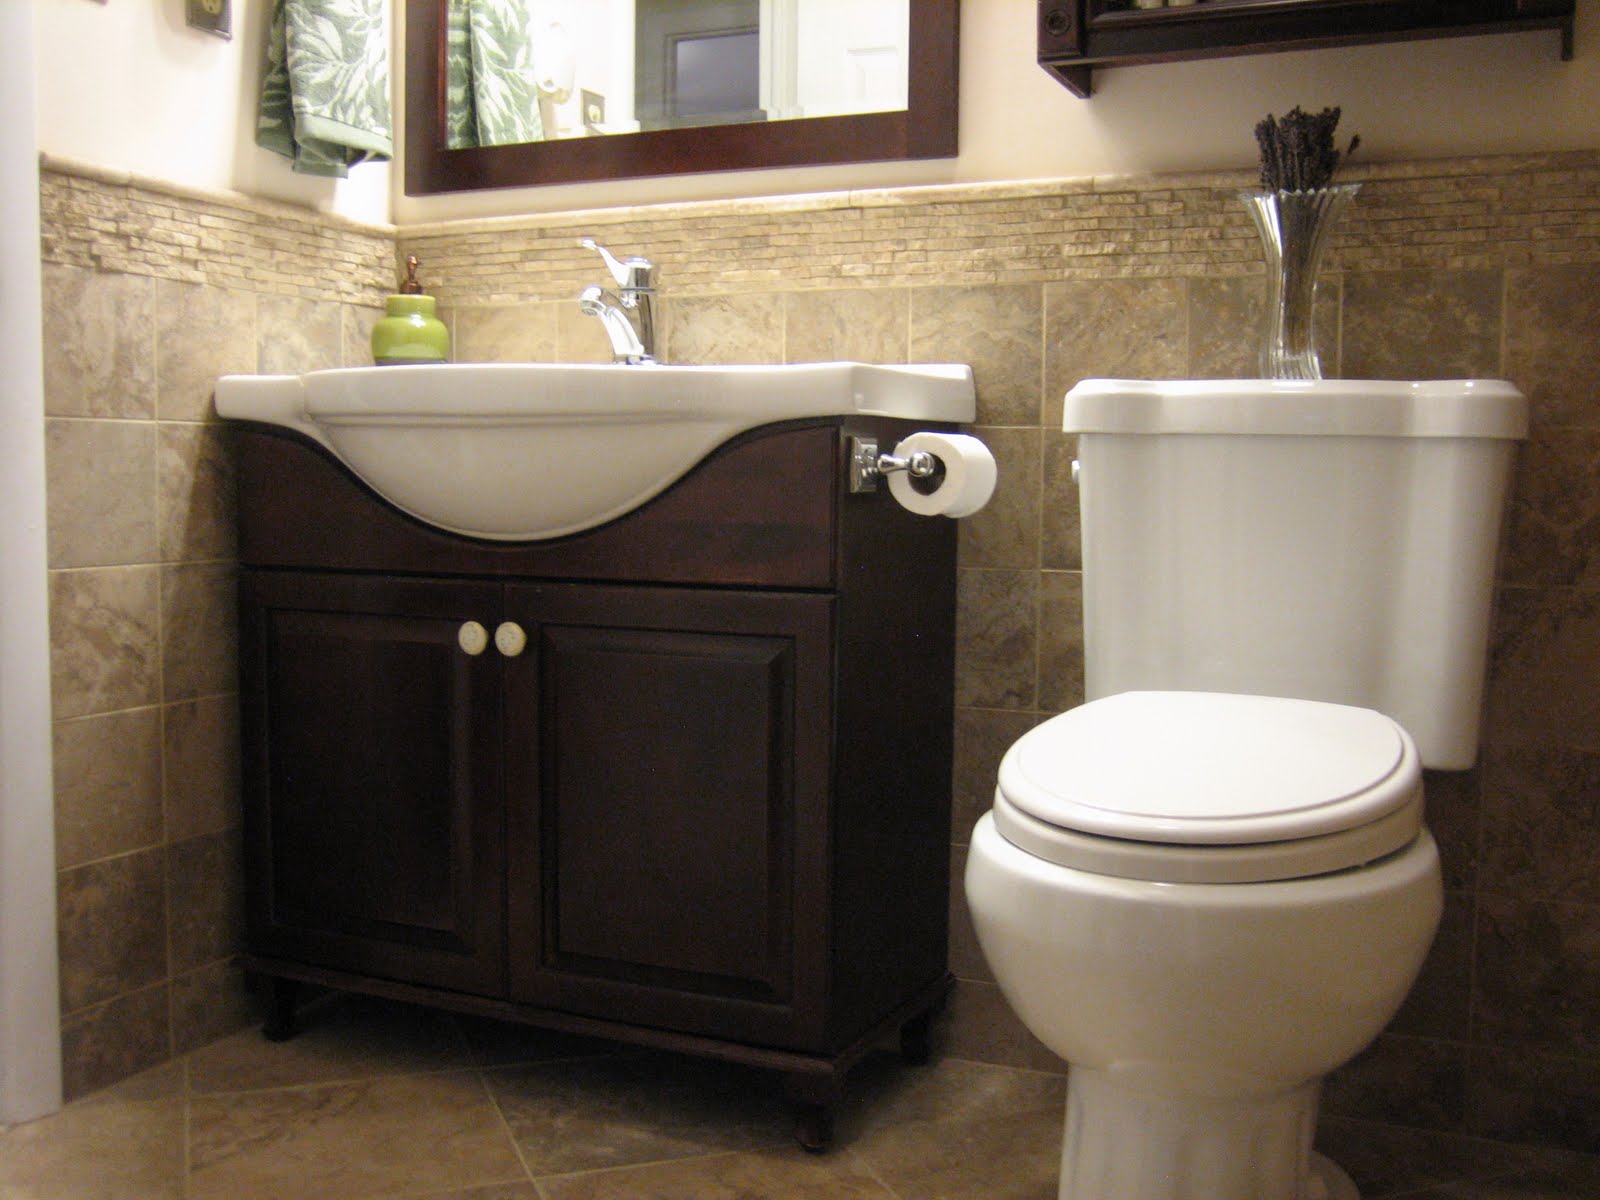 small bathroom tubs predict many years of relaxing showers for the happy homeowner!